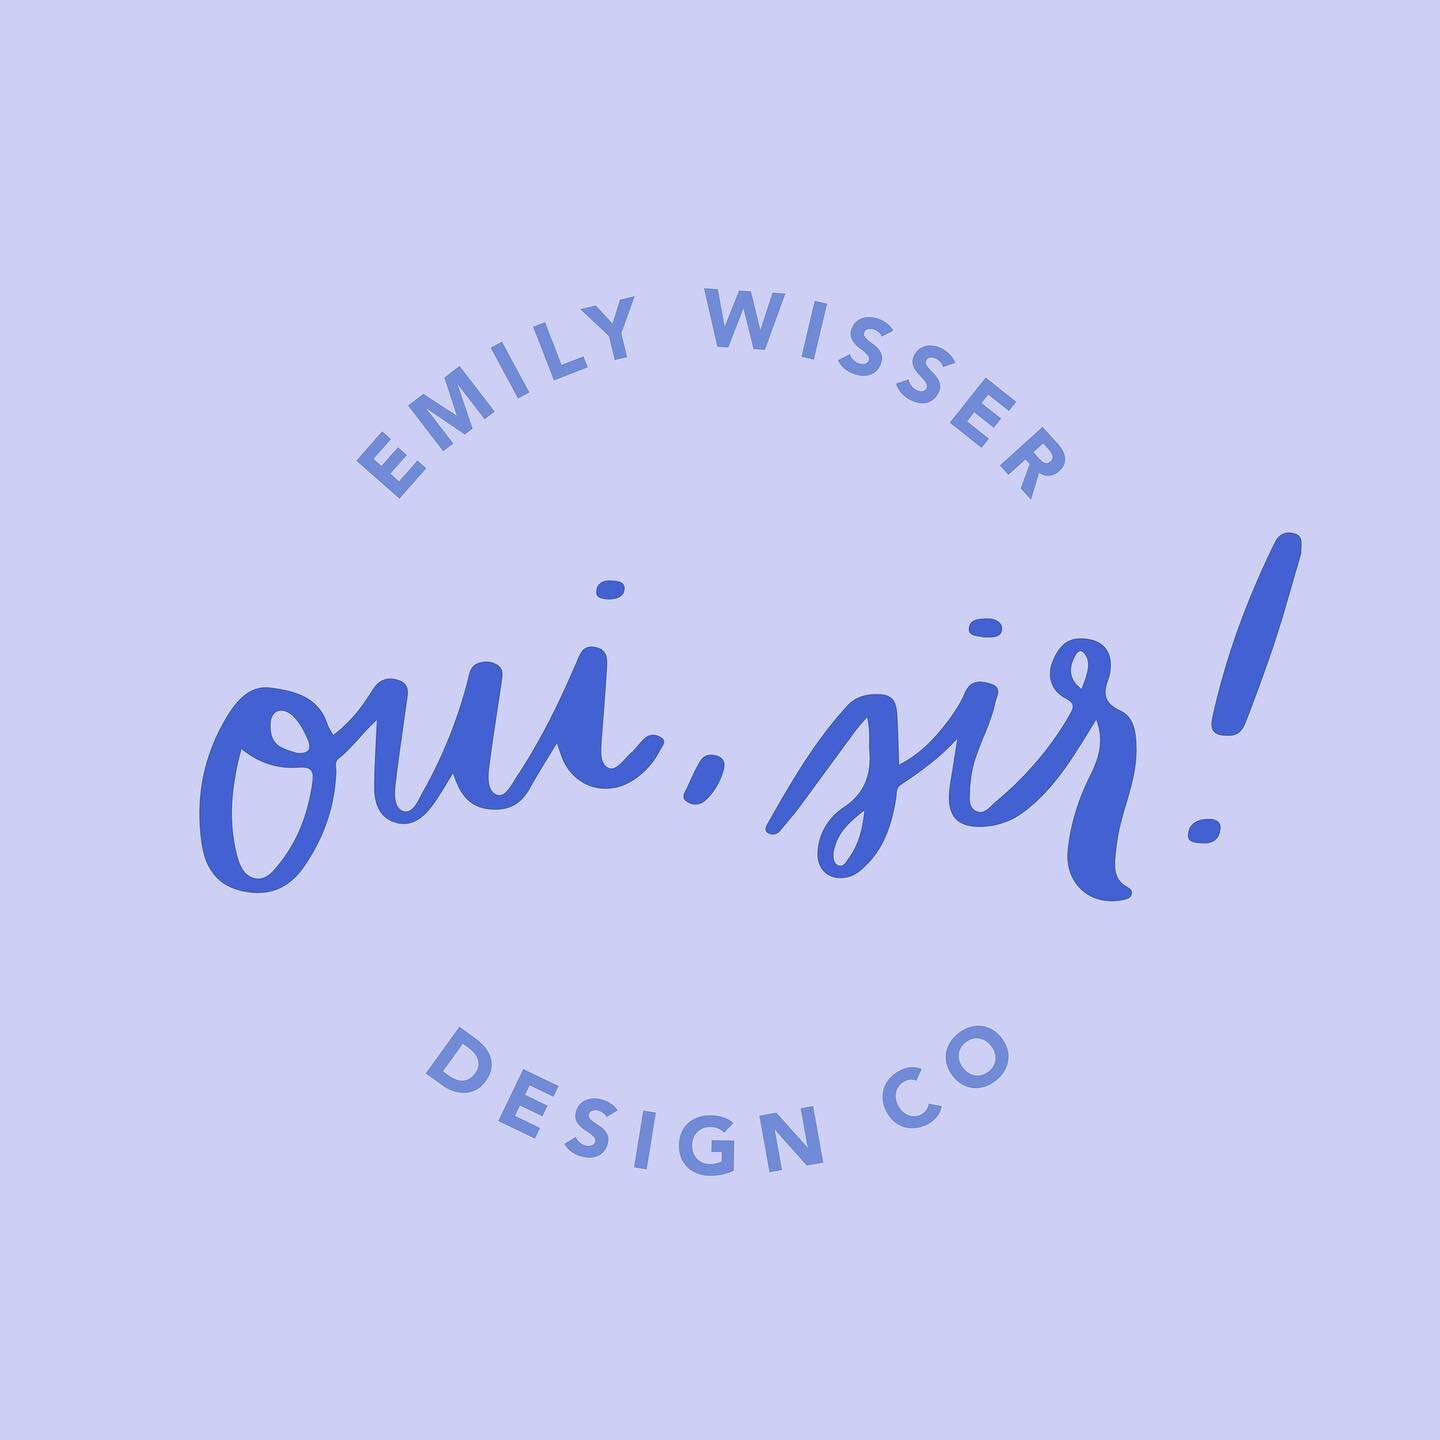 Why &ldquo;oui, sir!&rdquo; you ask? 

My name is Emily Wisser. My last name isn&rsquo;t the most intuitive to pronounce. It&rsquo;s German and people have struggled with it most of my life. But breaking it down into the French word &ldquo;oui&rdquo;